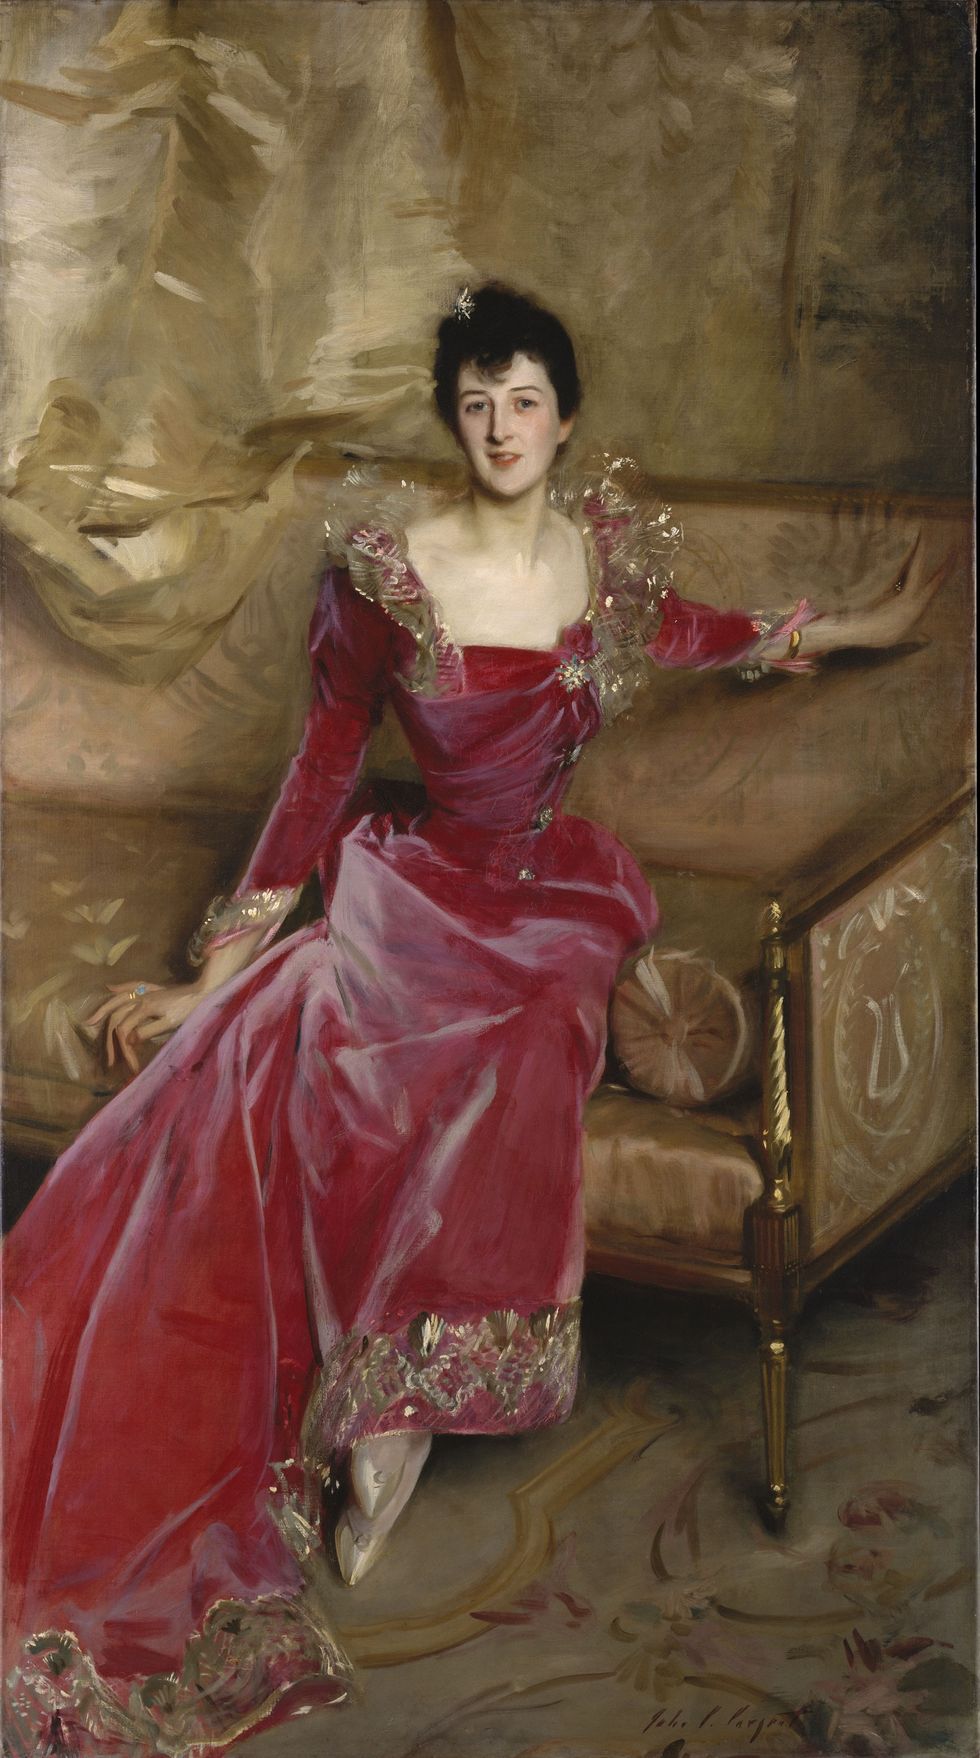 mrs hugh hammersley, 1892 artwork location metropolitan museum of art, new york, usa permission for usage must be provided in writing from scala